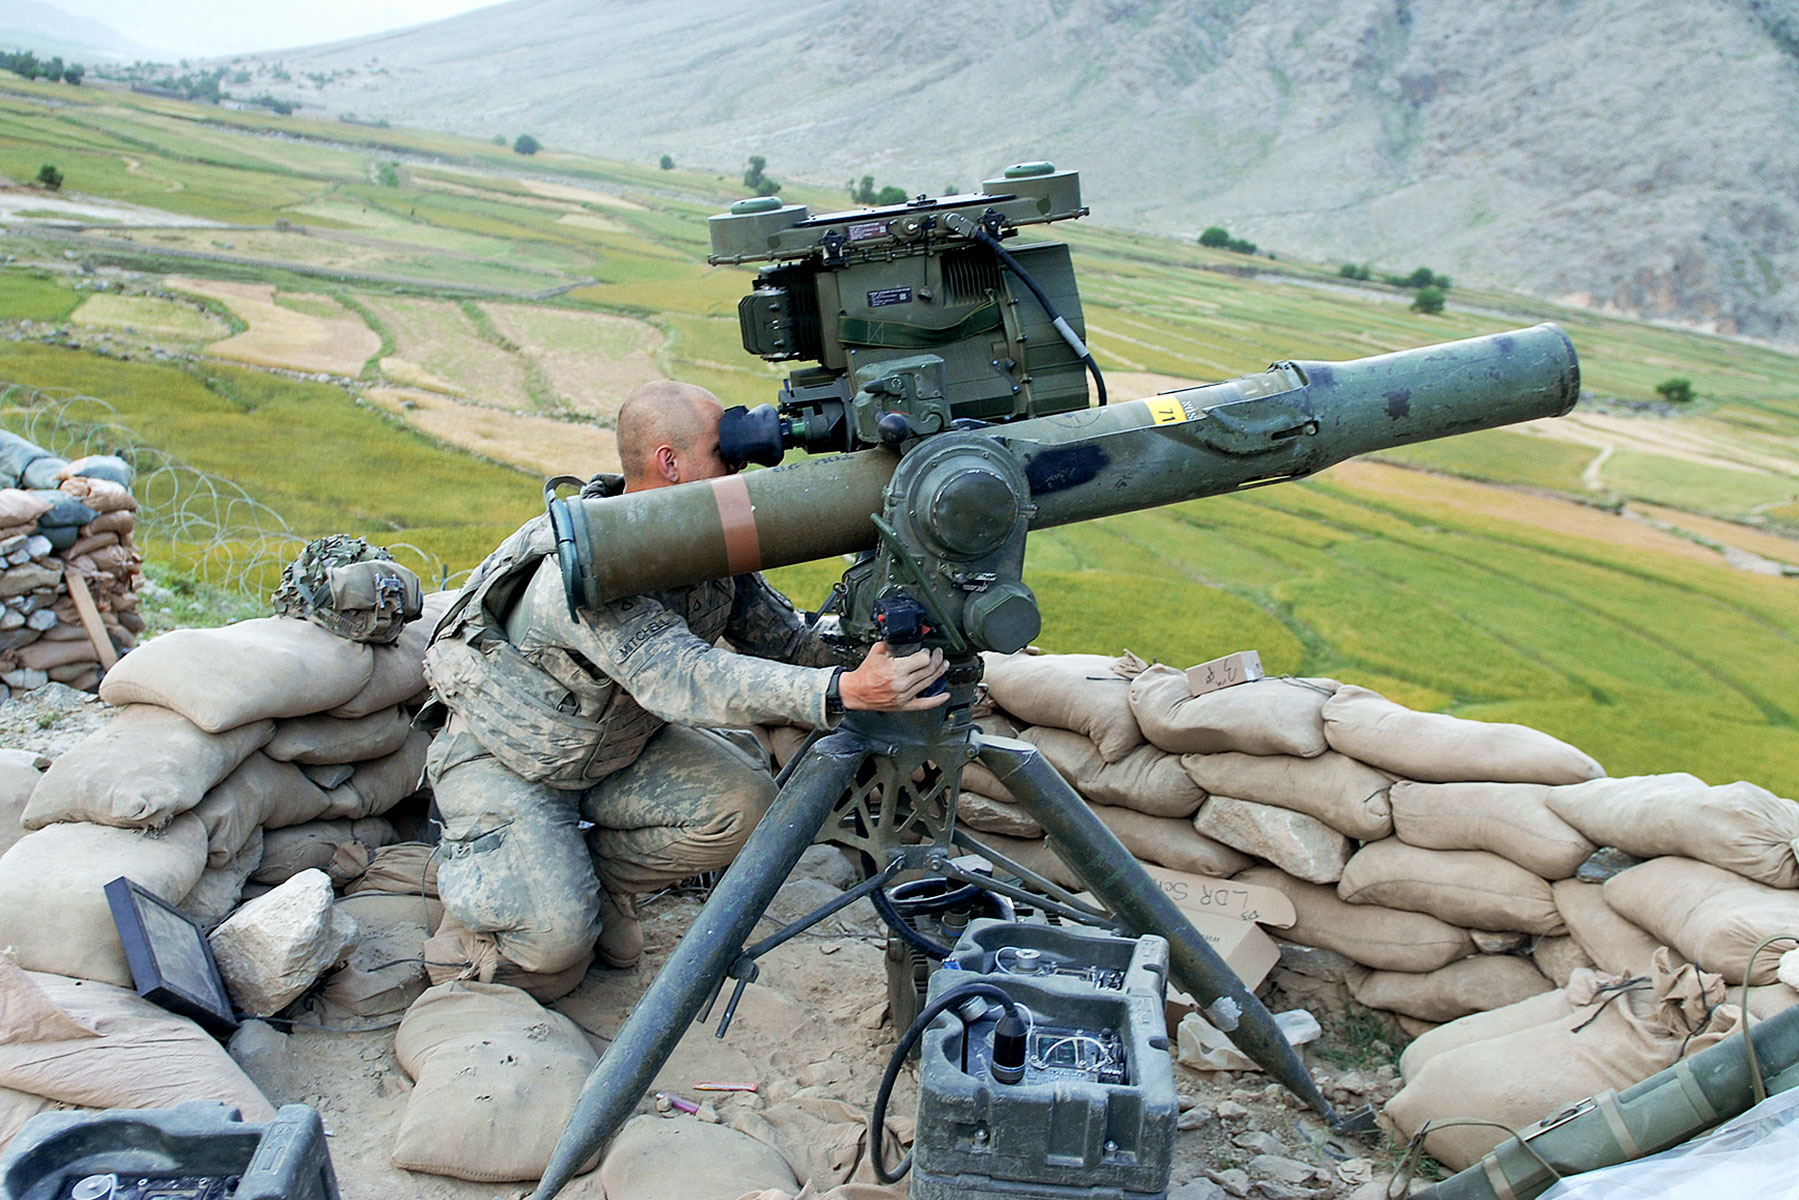 BGM-71 TOW missile system